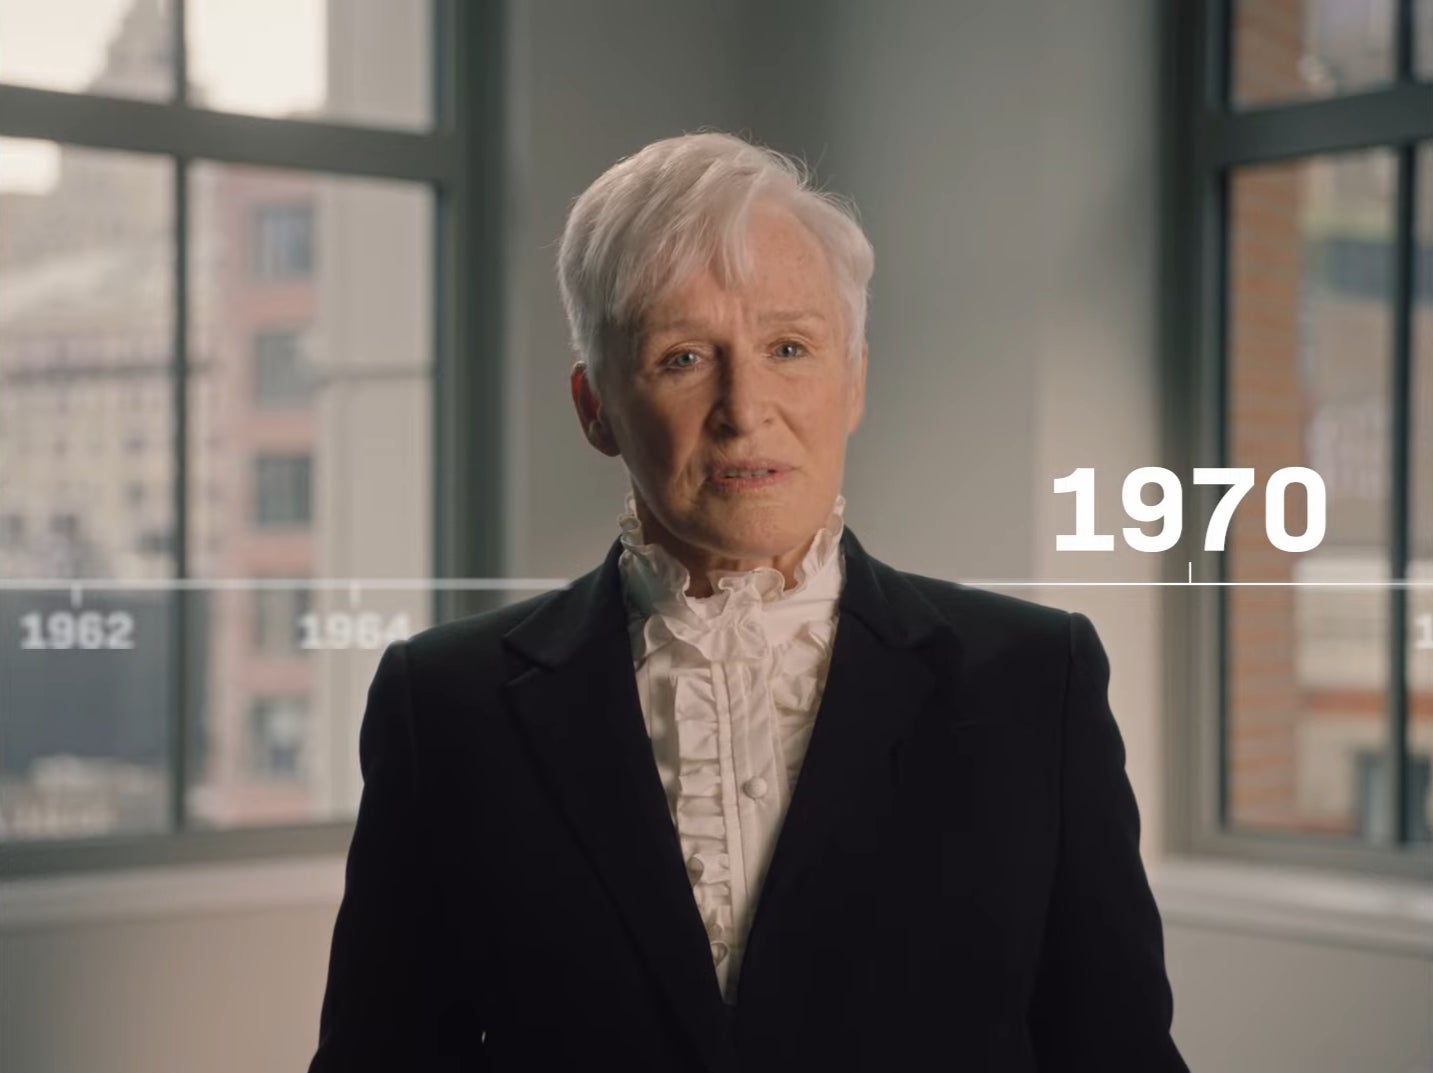 Glenn Close appears in The Speeches by RE:TV